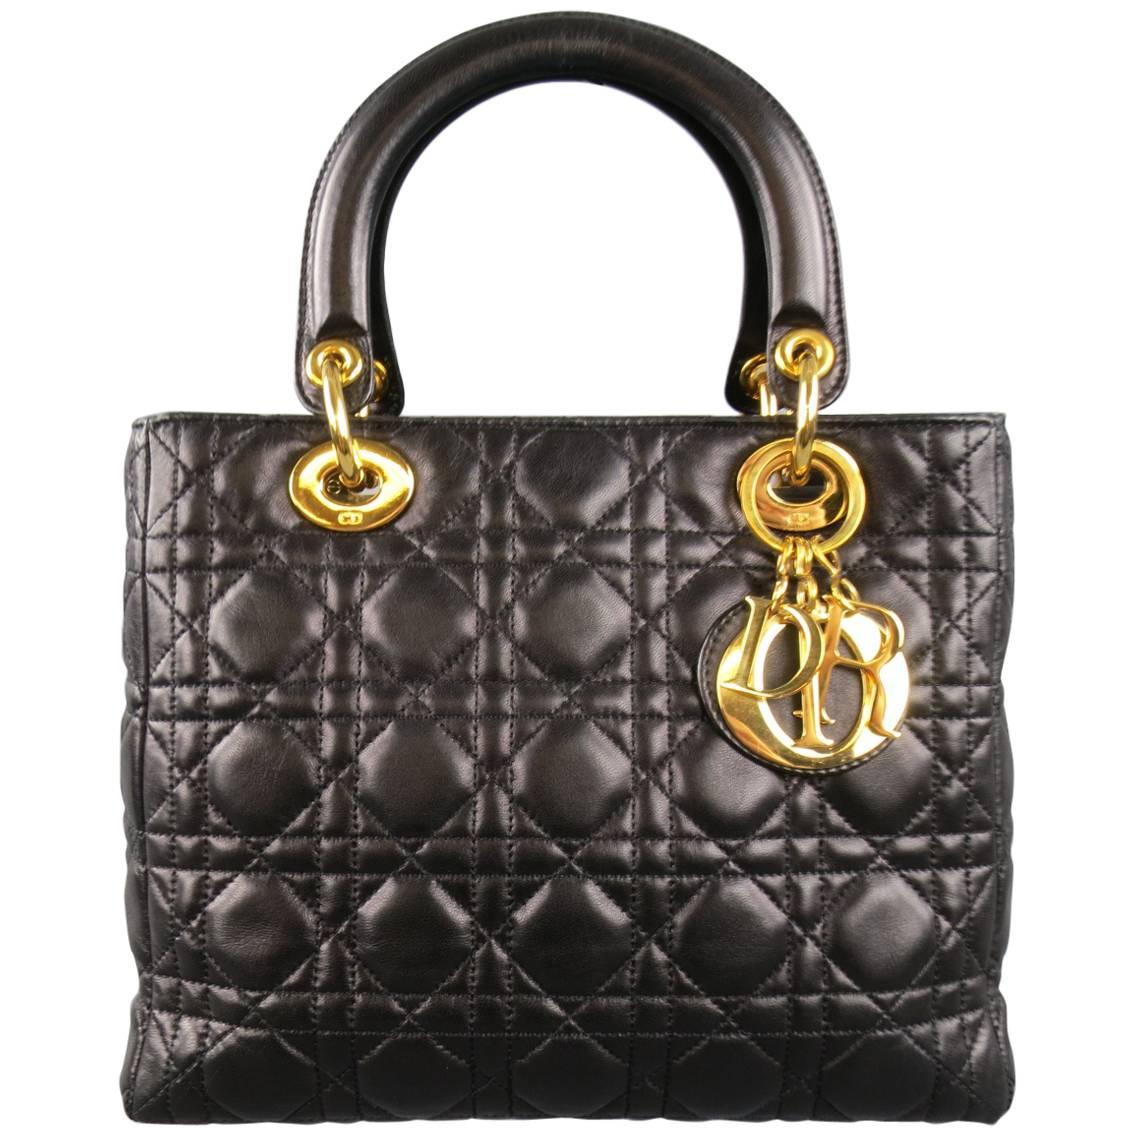 CHRISTIAN DIOR Black & Gold Cannage Quilted Leather Medium Lady Dior Bag